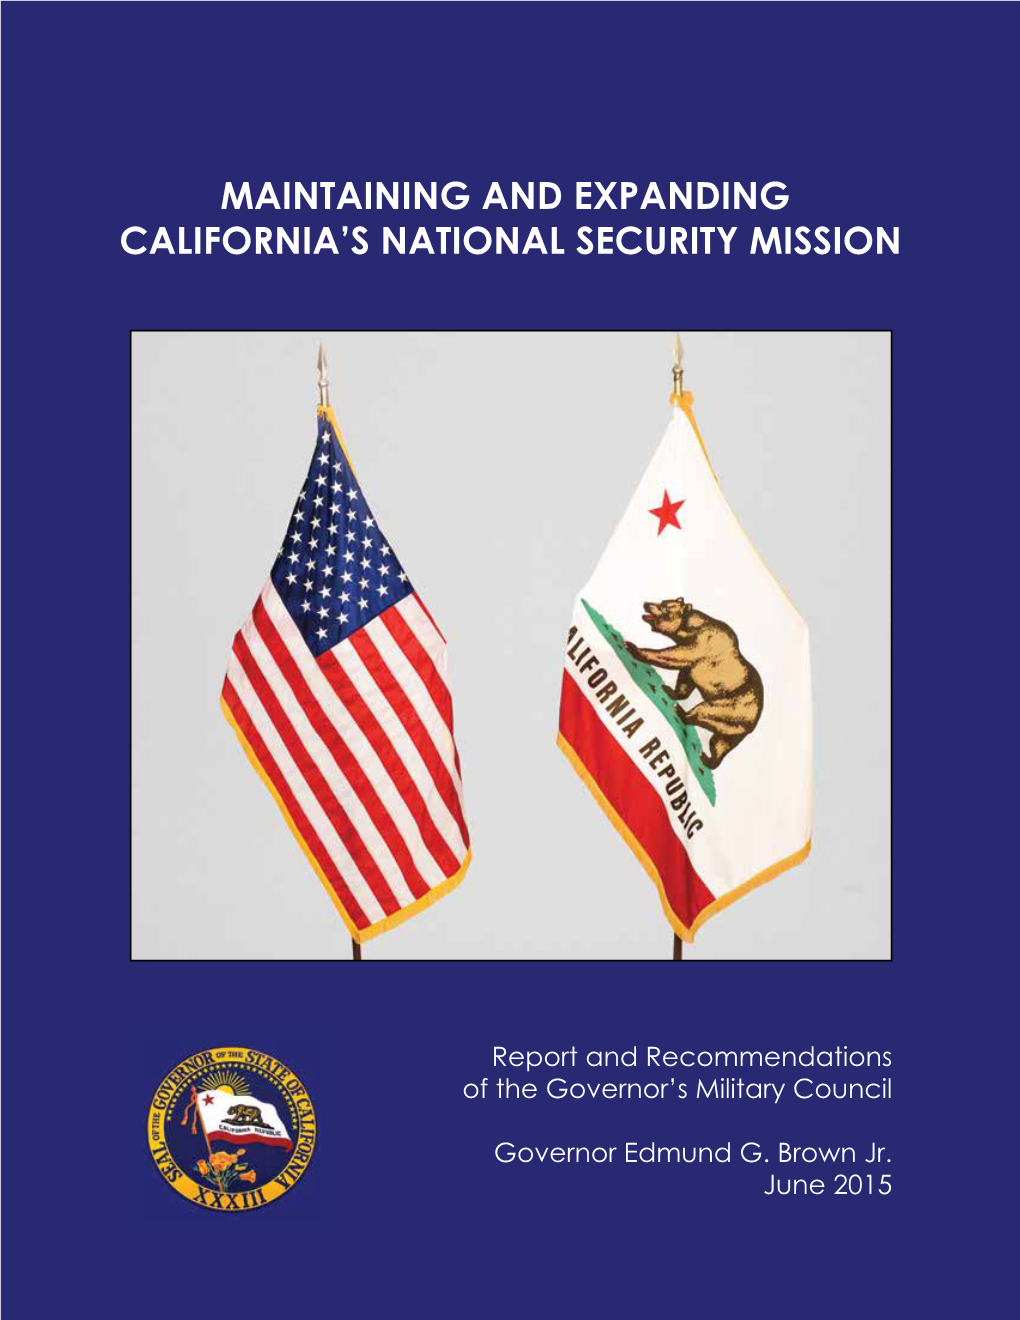 Maintaining and Expanding California's National Security Mission